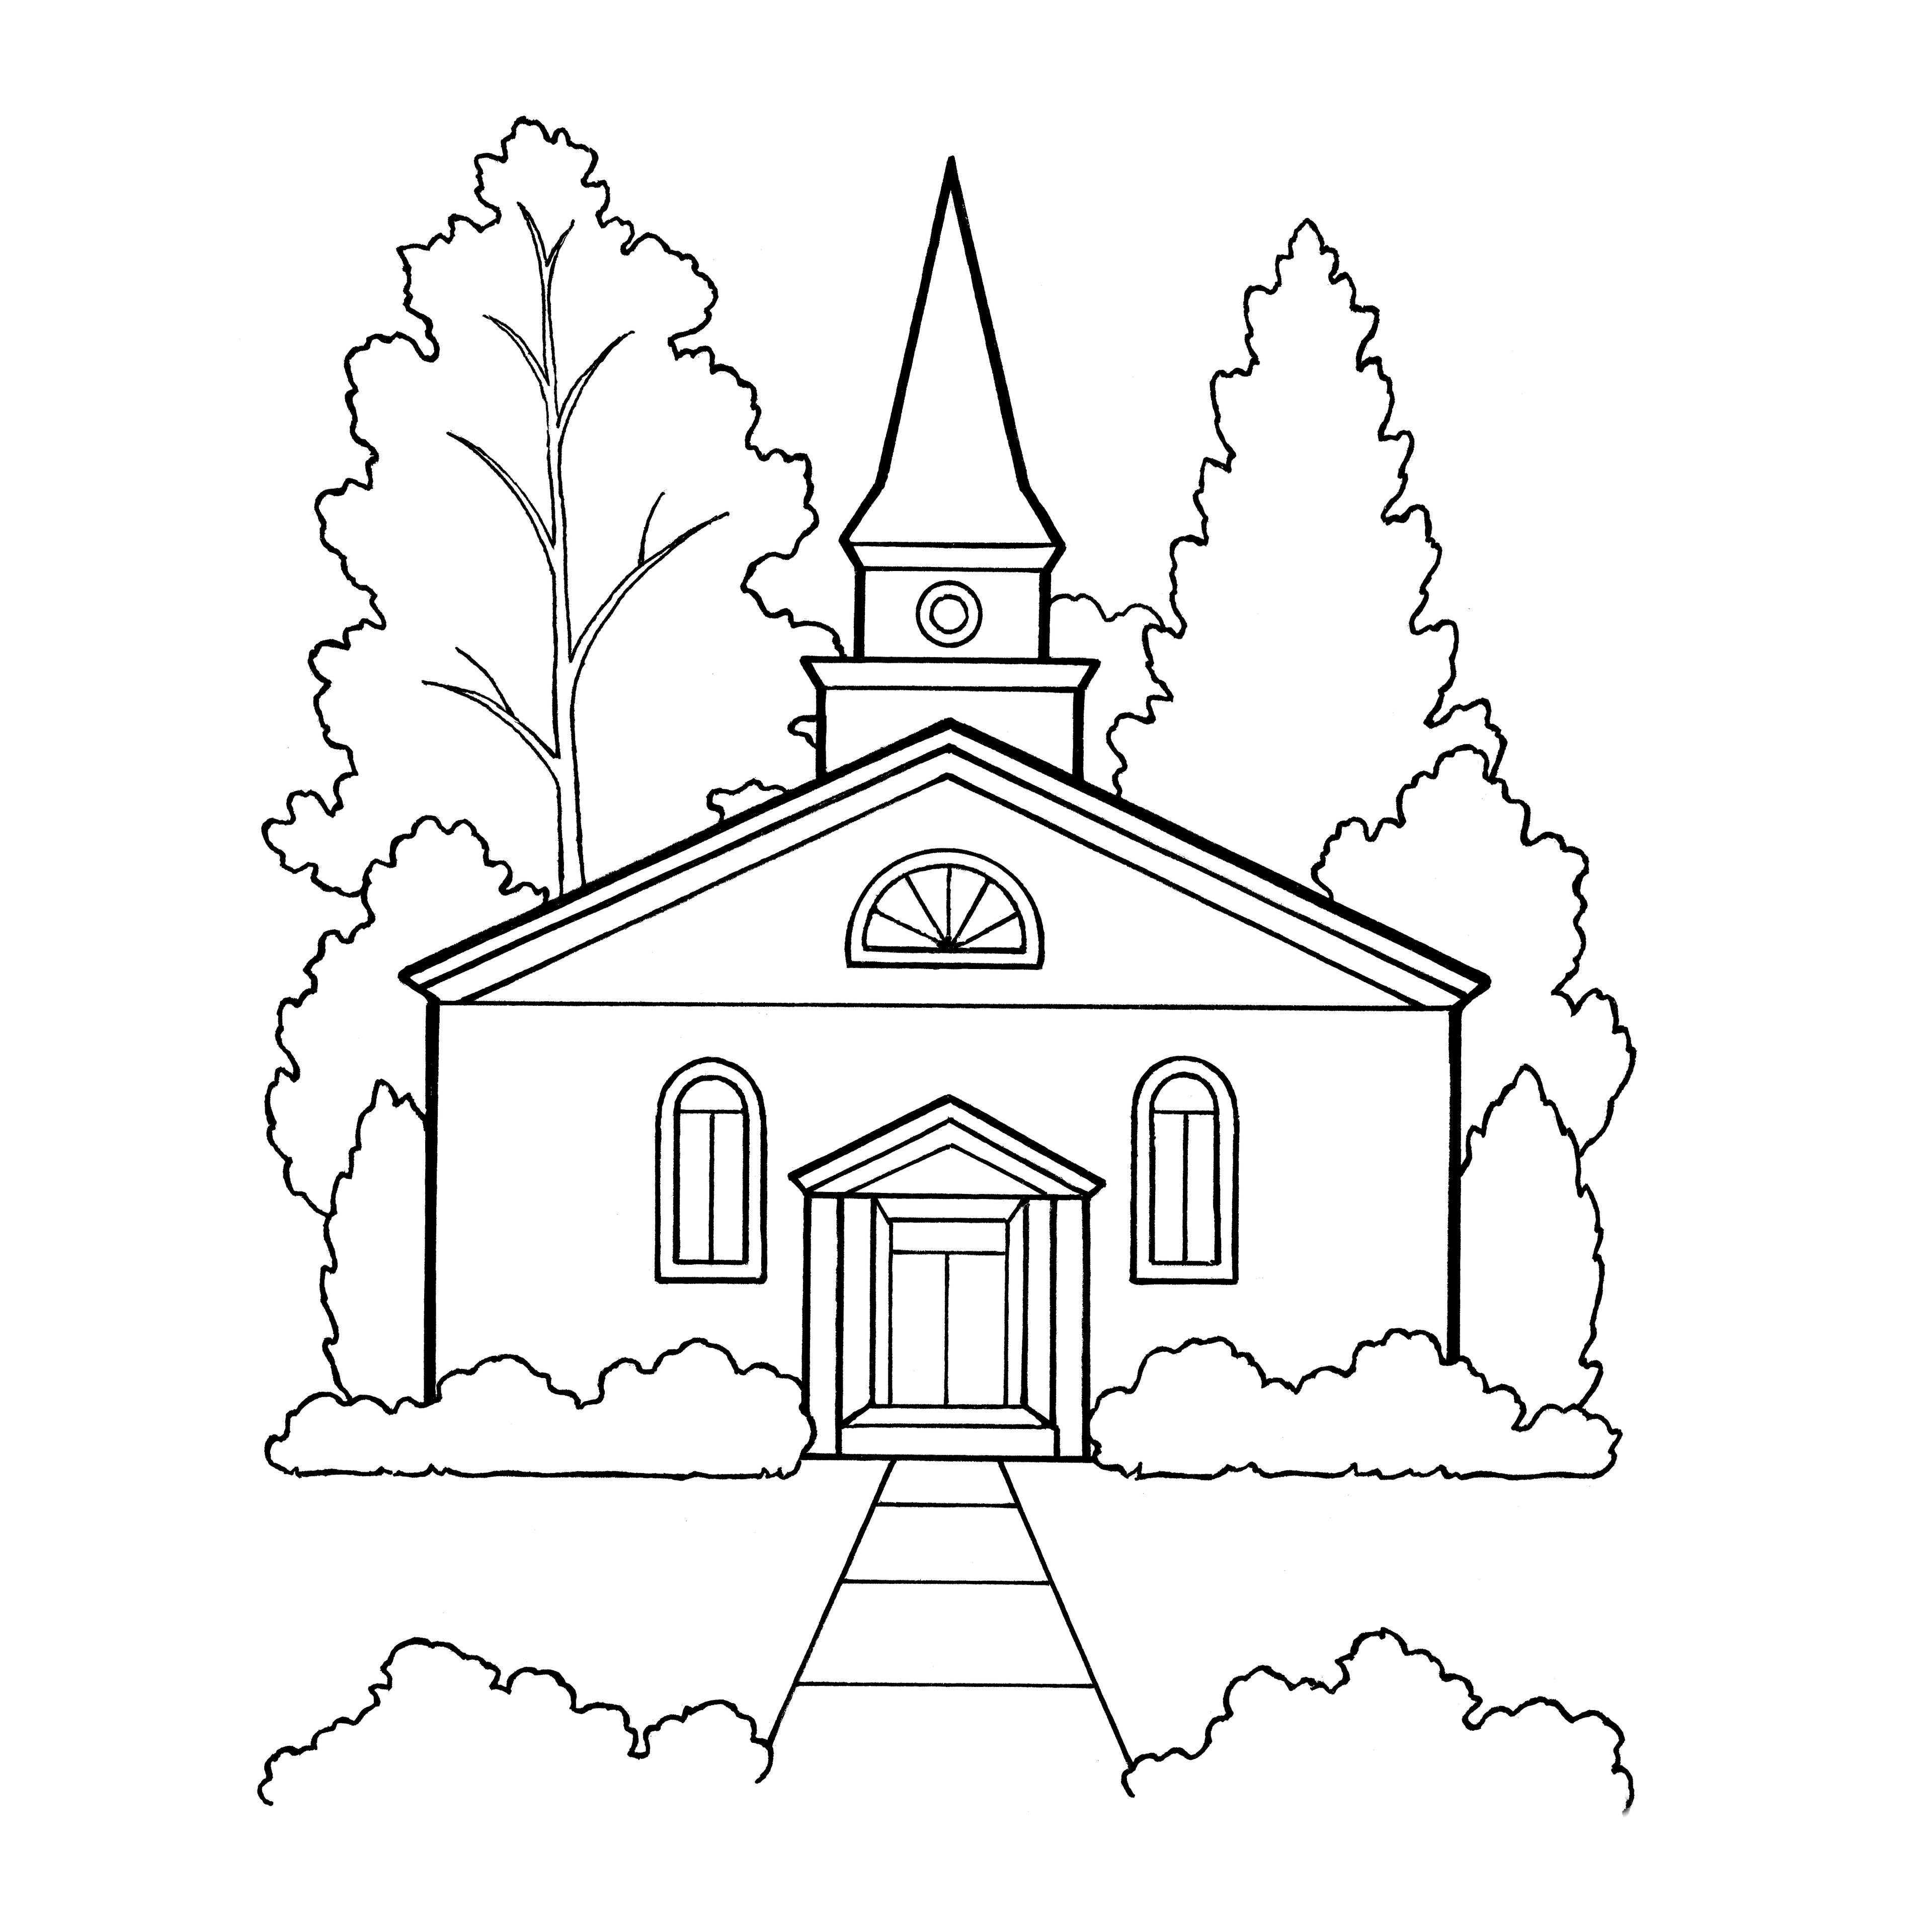 An illustration of the eleventh article of faith—“Worship” (a Church building).